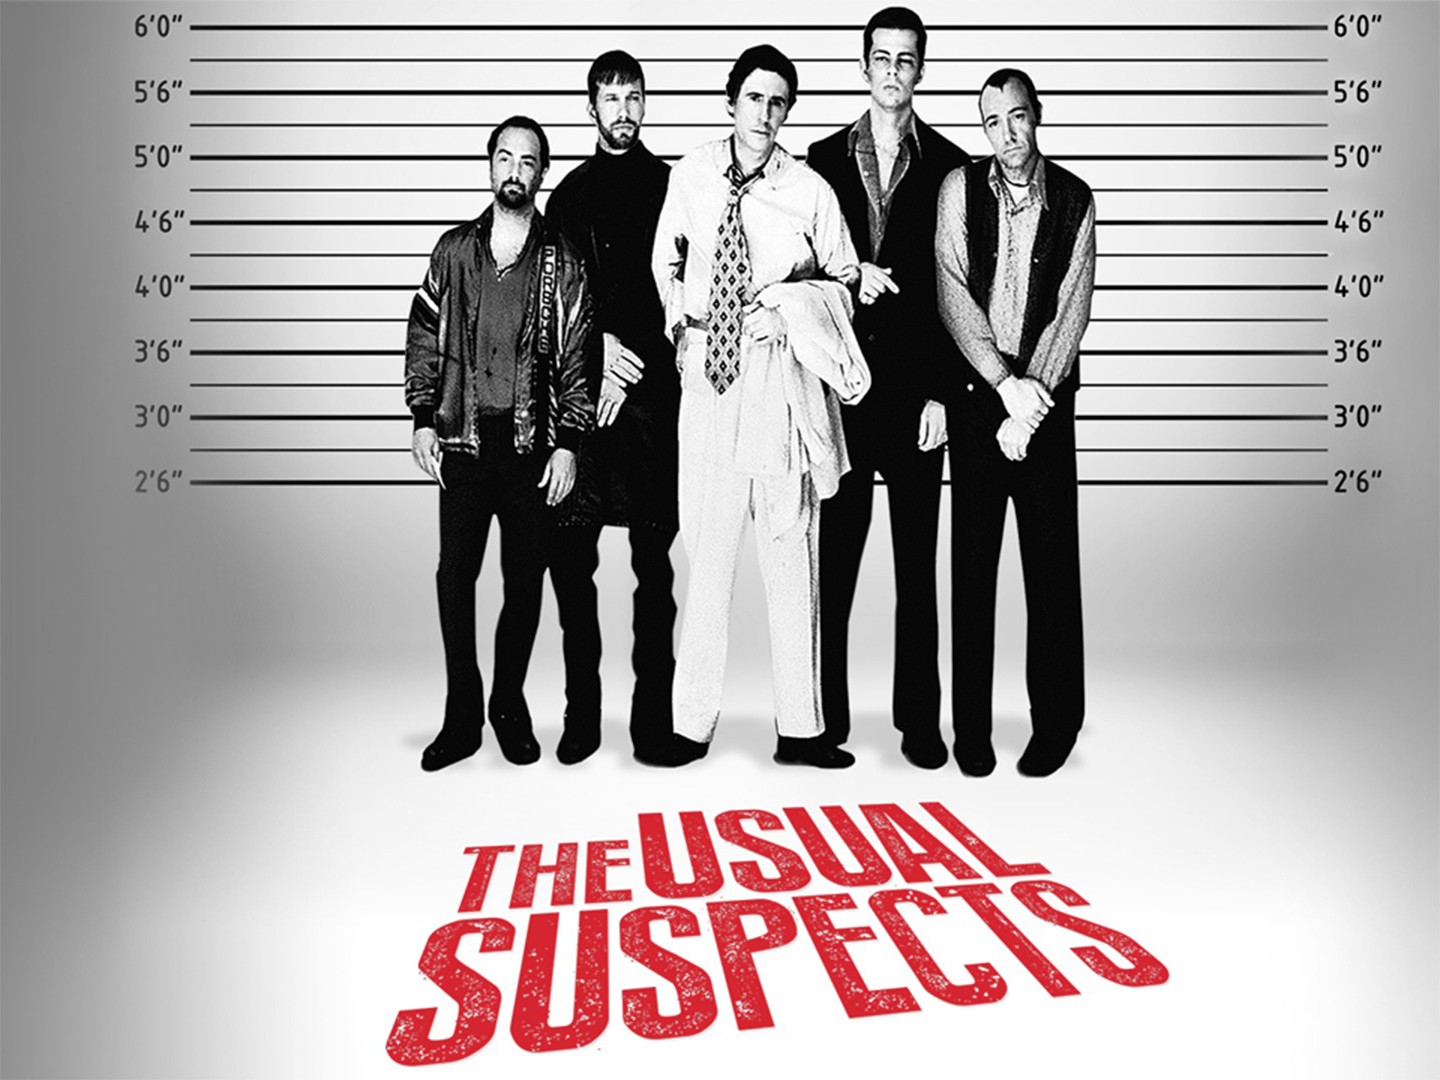 20 facts you might not know about 'The Usual Suspects